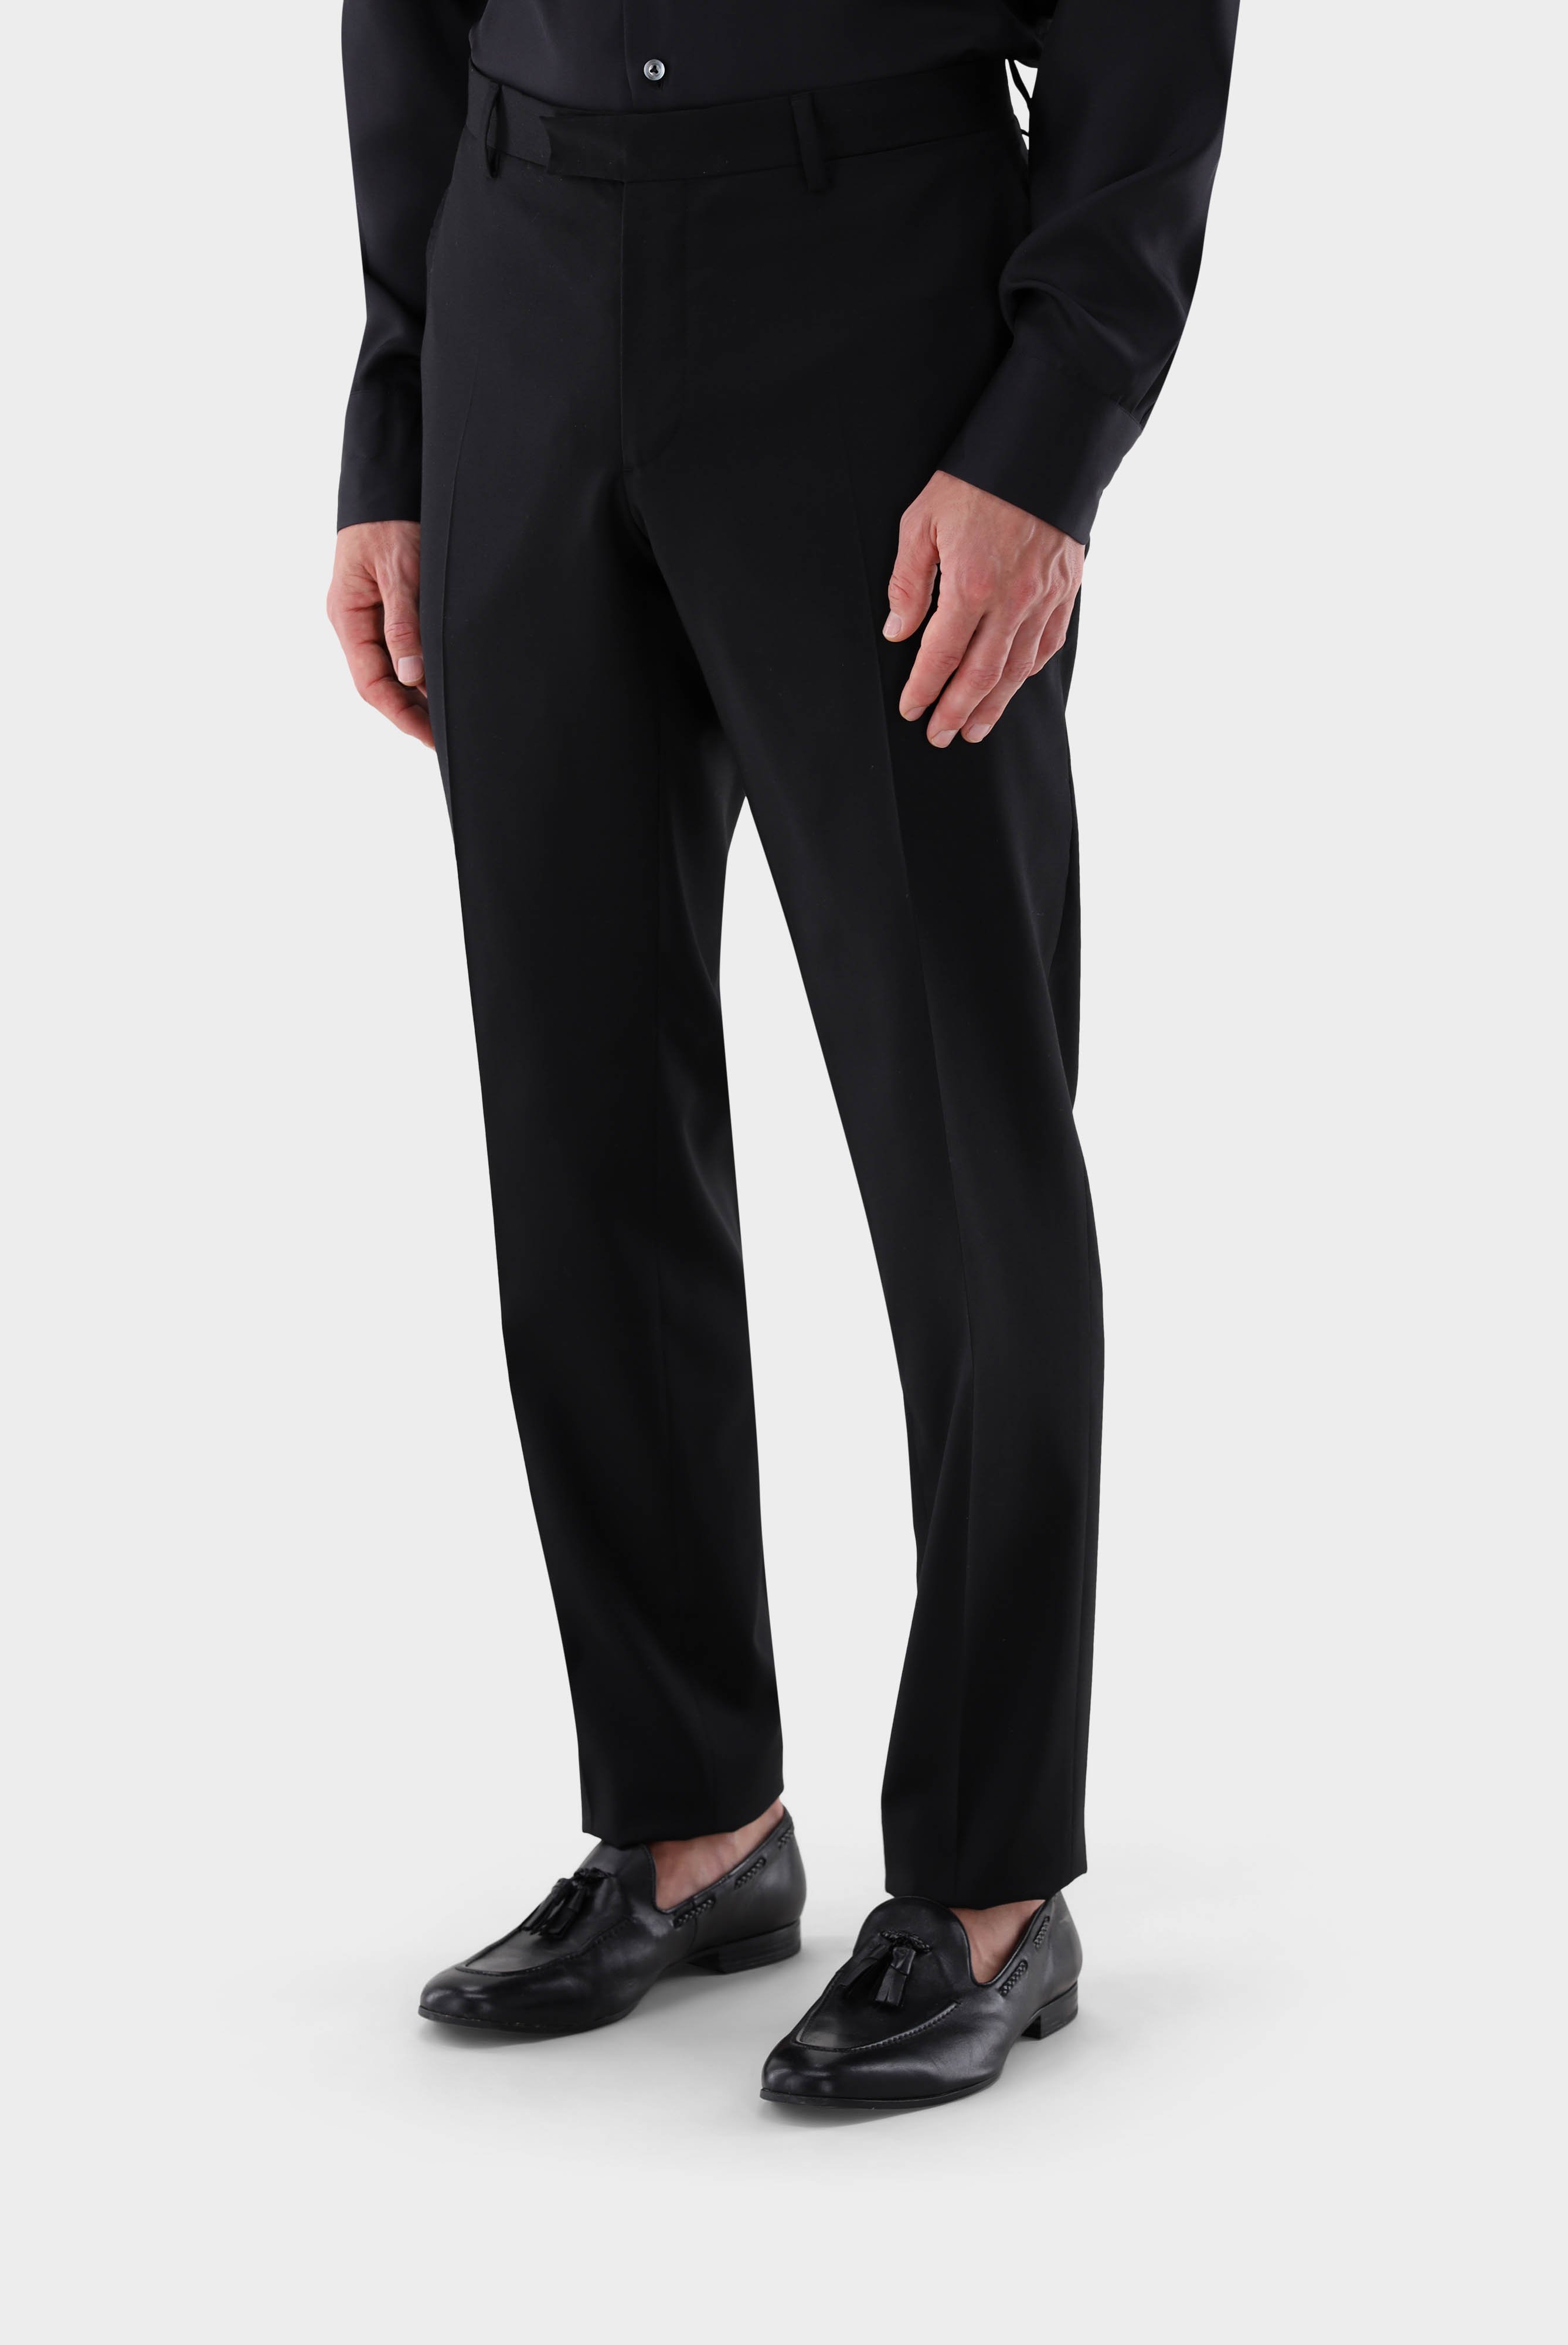 Jeans & Trousers+Wool Trousers Slim Fit+20.7880.16.H01010.099.31